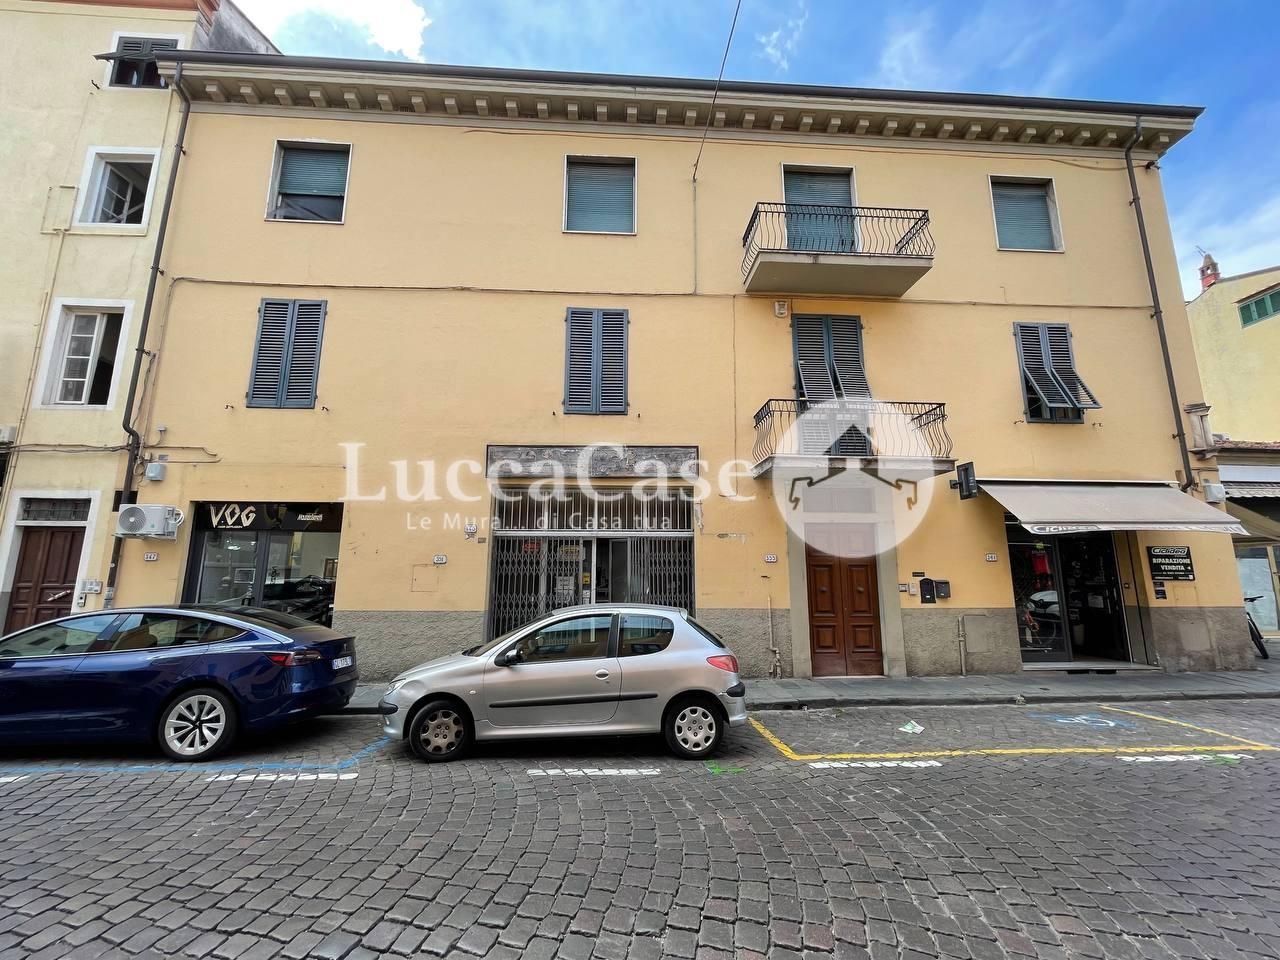 Business mall for sale in Lucca